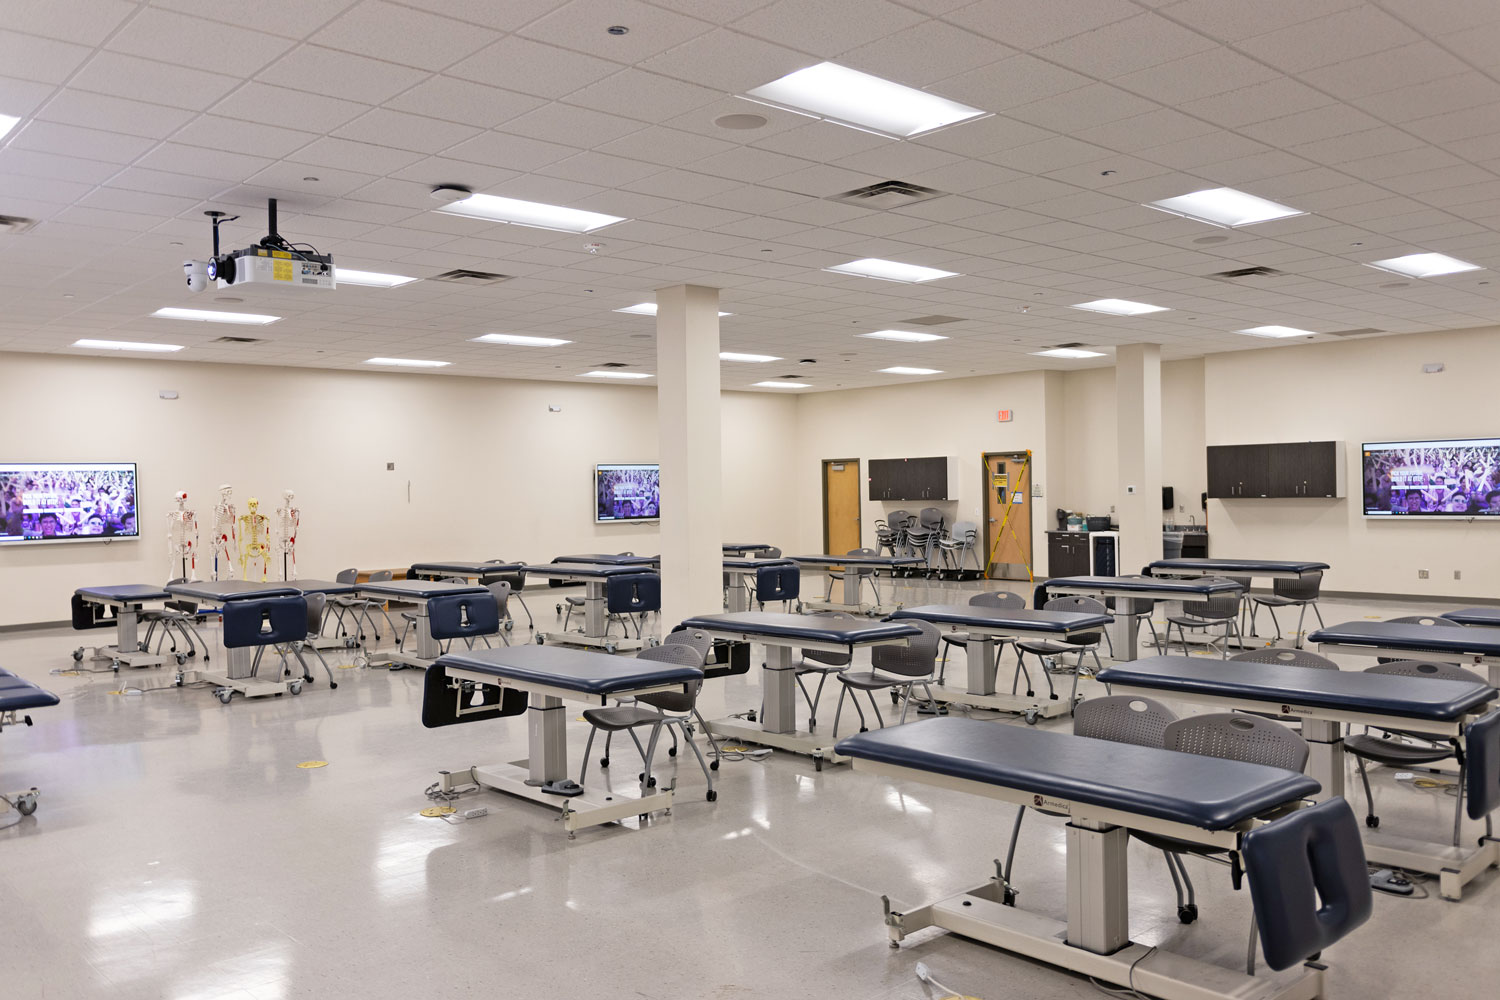 AVoIP signal routing with NAV allows the divisible rehabilitation training rooms to be open to collaborative plus hands-on learning for a larger number of students at the same time.